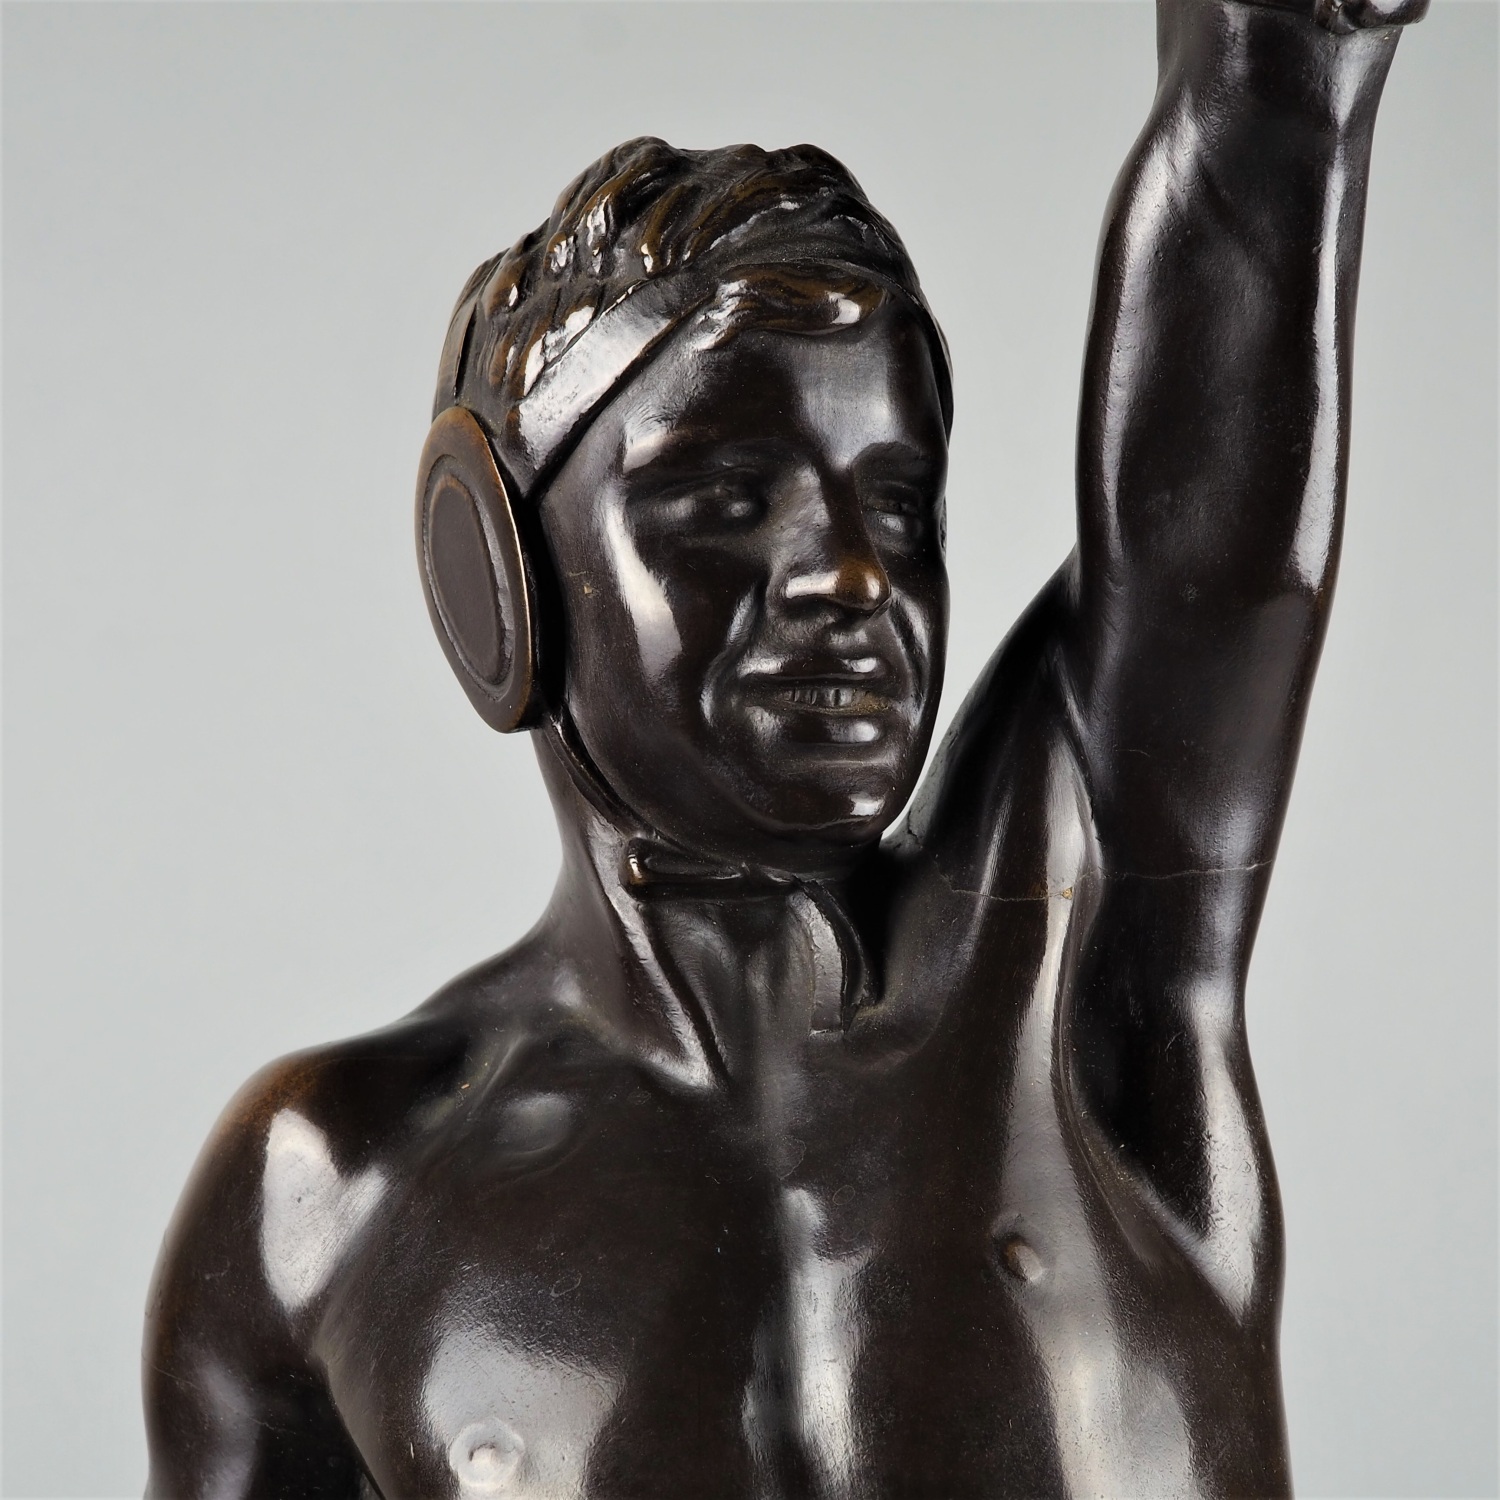 Large bronze of a victorious fist fighter by Heinrich Baucke around 1900, H. 66cm (26 in) - Image 4 of 5